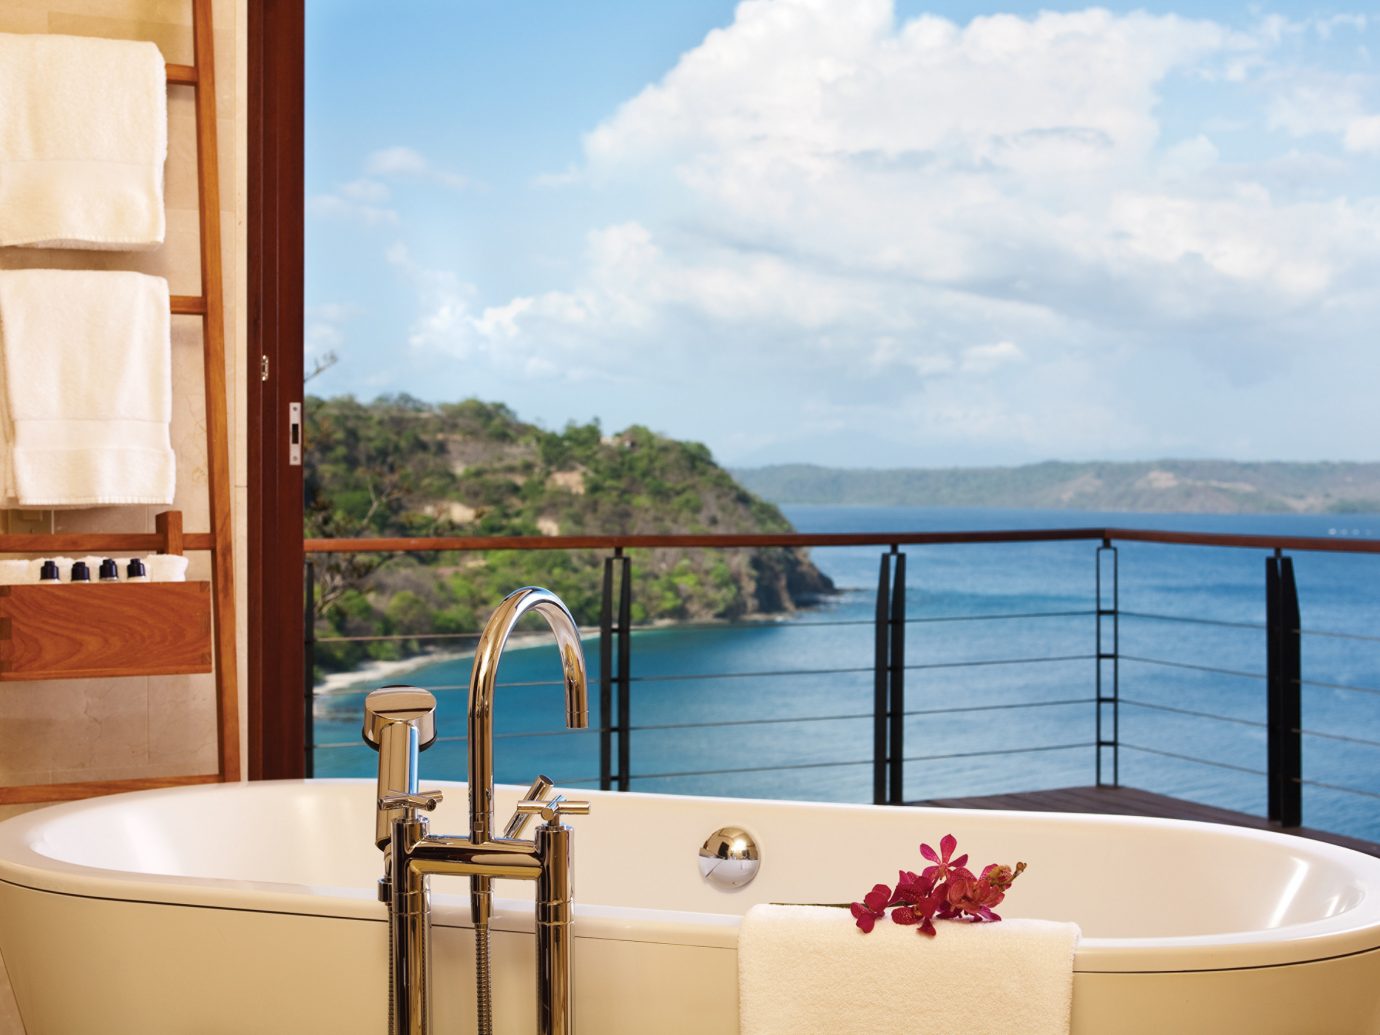 Bathtub and view at the Four Seasons Costa Rica